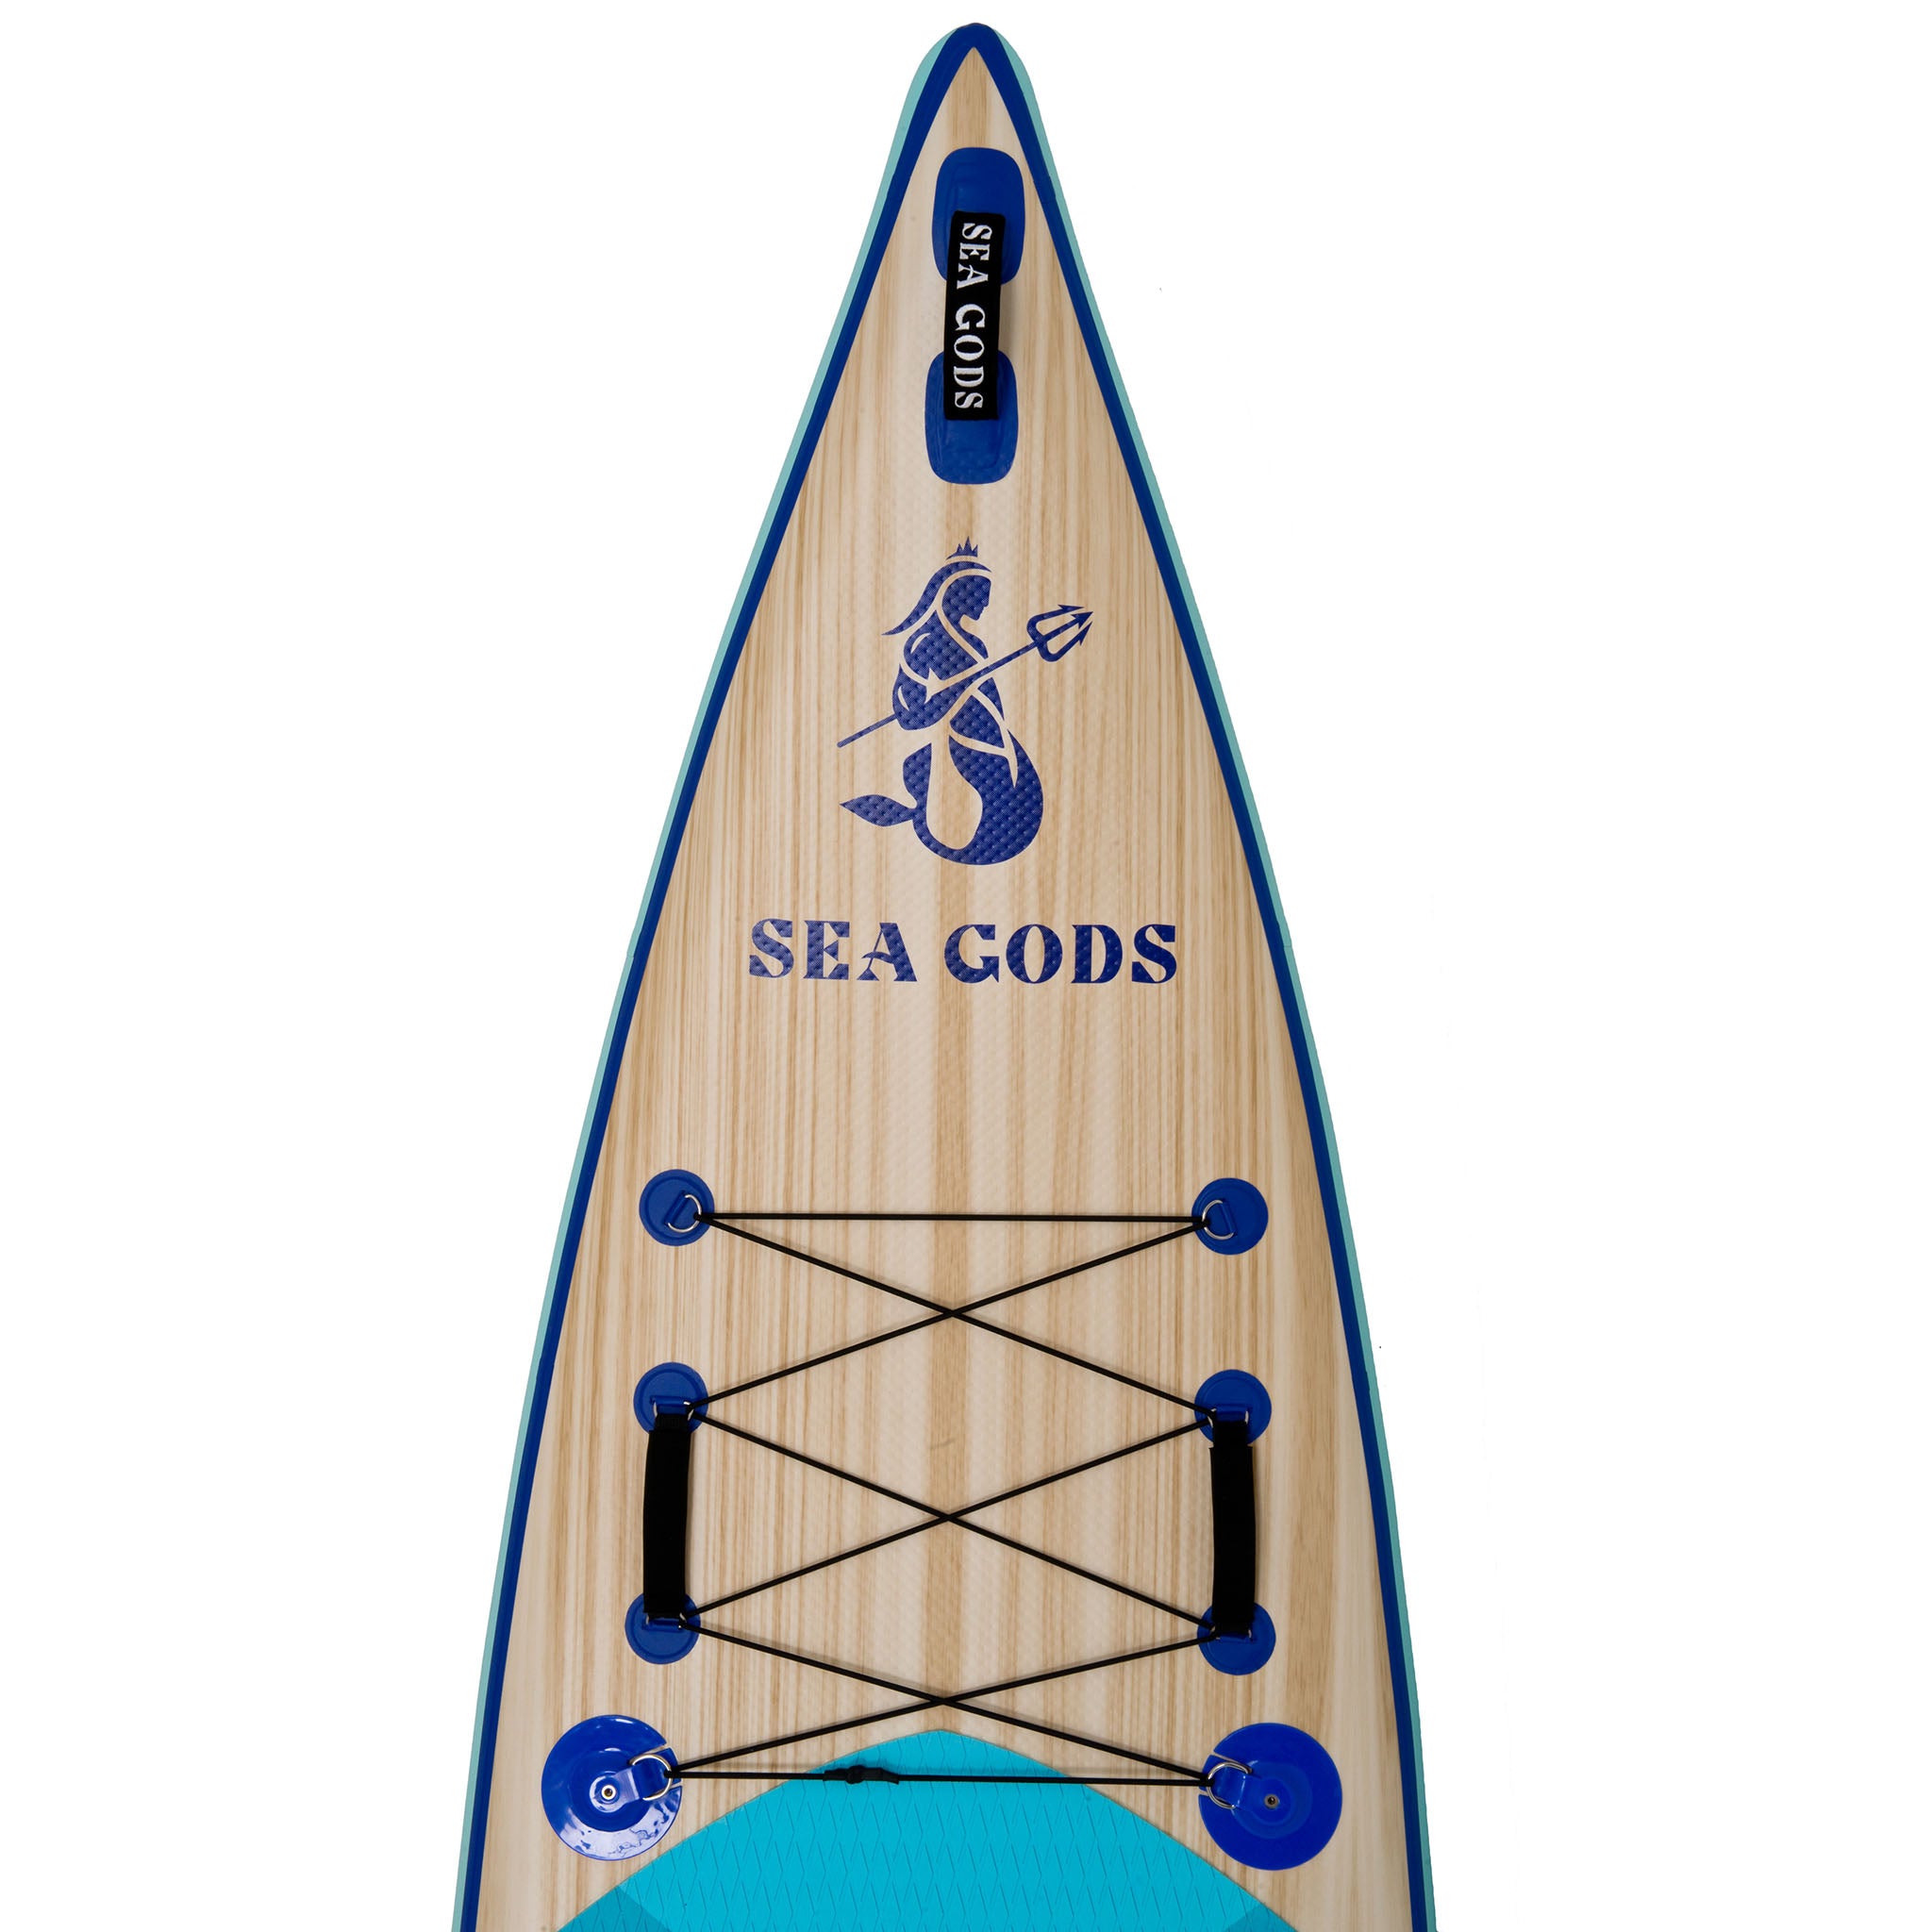 2022 Carta Marina Inflatable Paddleboard  - Nose features carrying handle and d-ring tie-downs